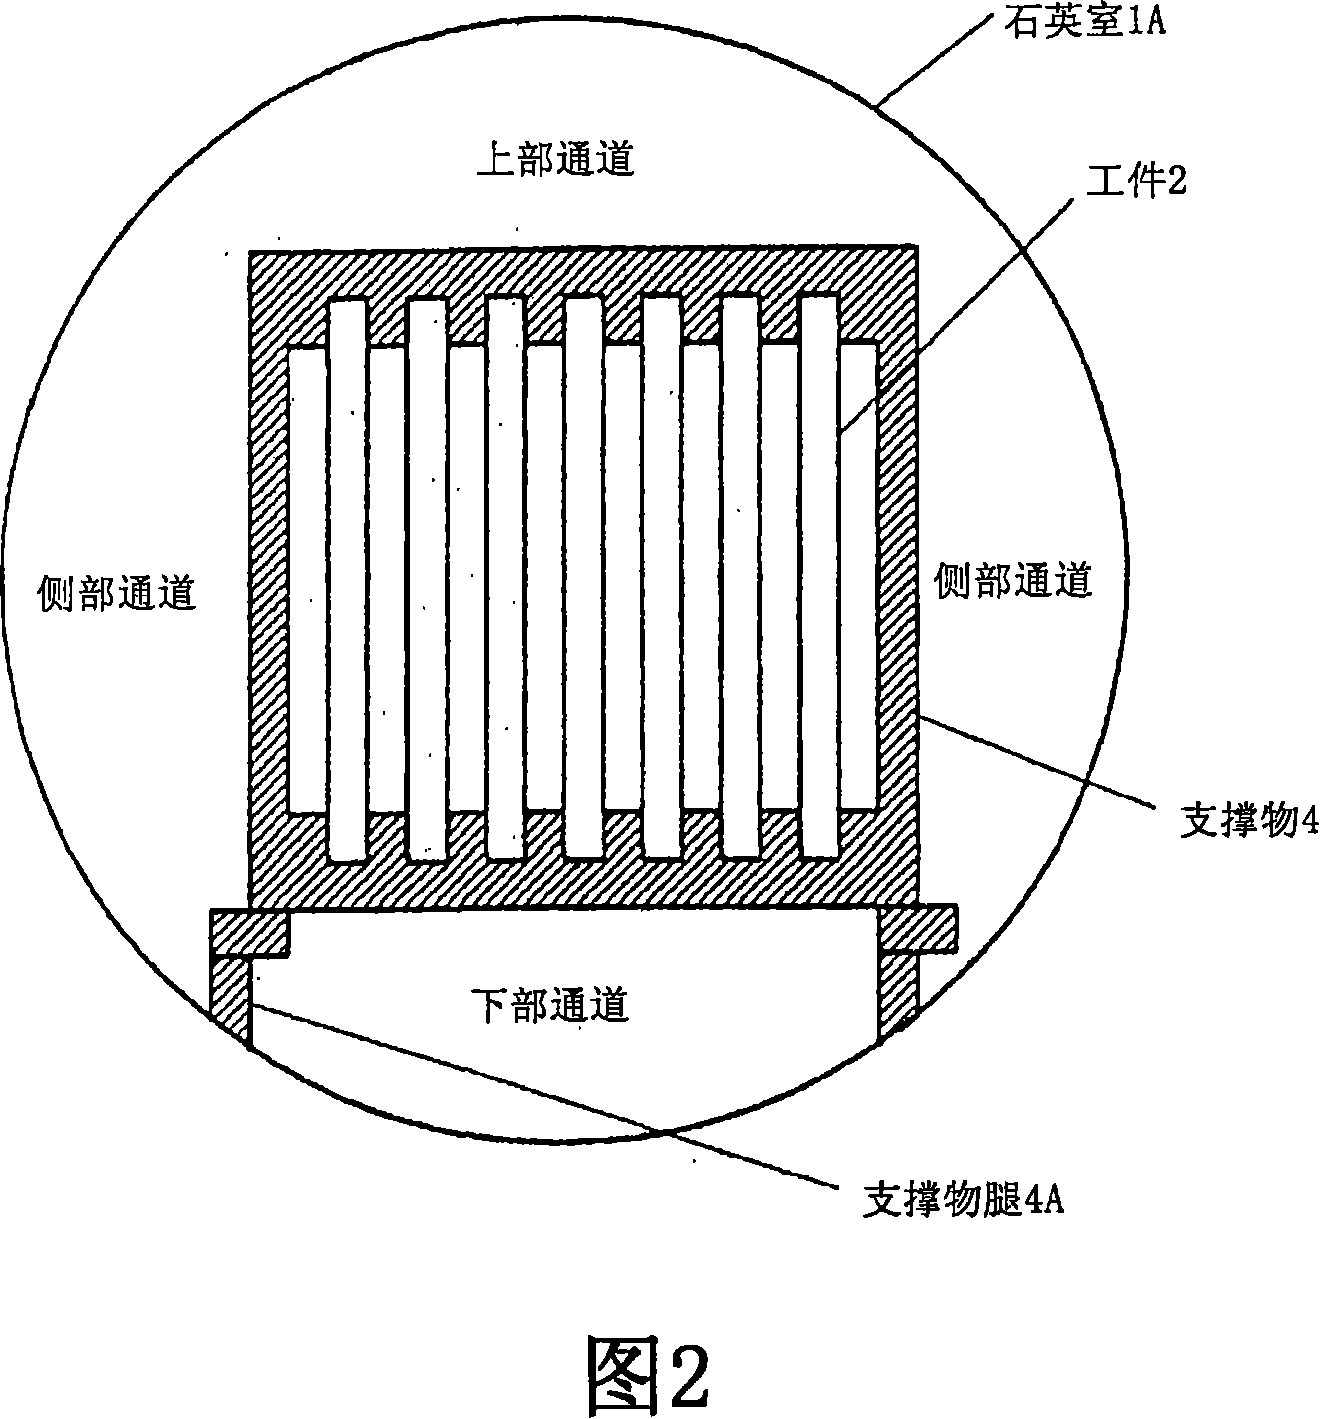 Method for forming light absorbing layer in cis-based thin film solar battery